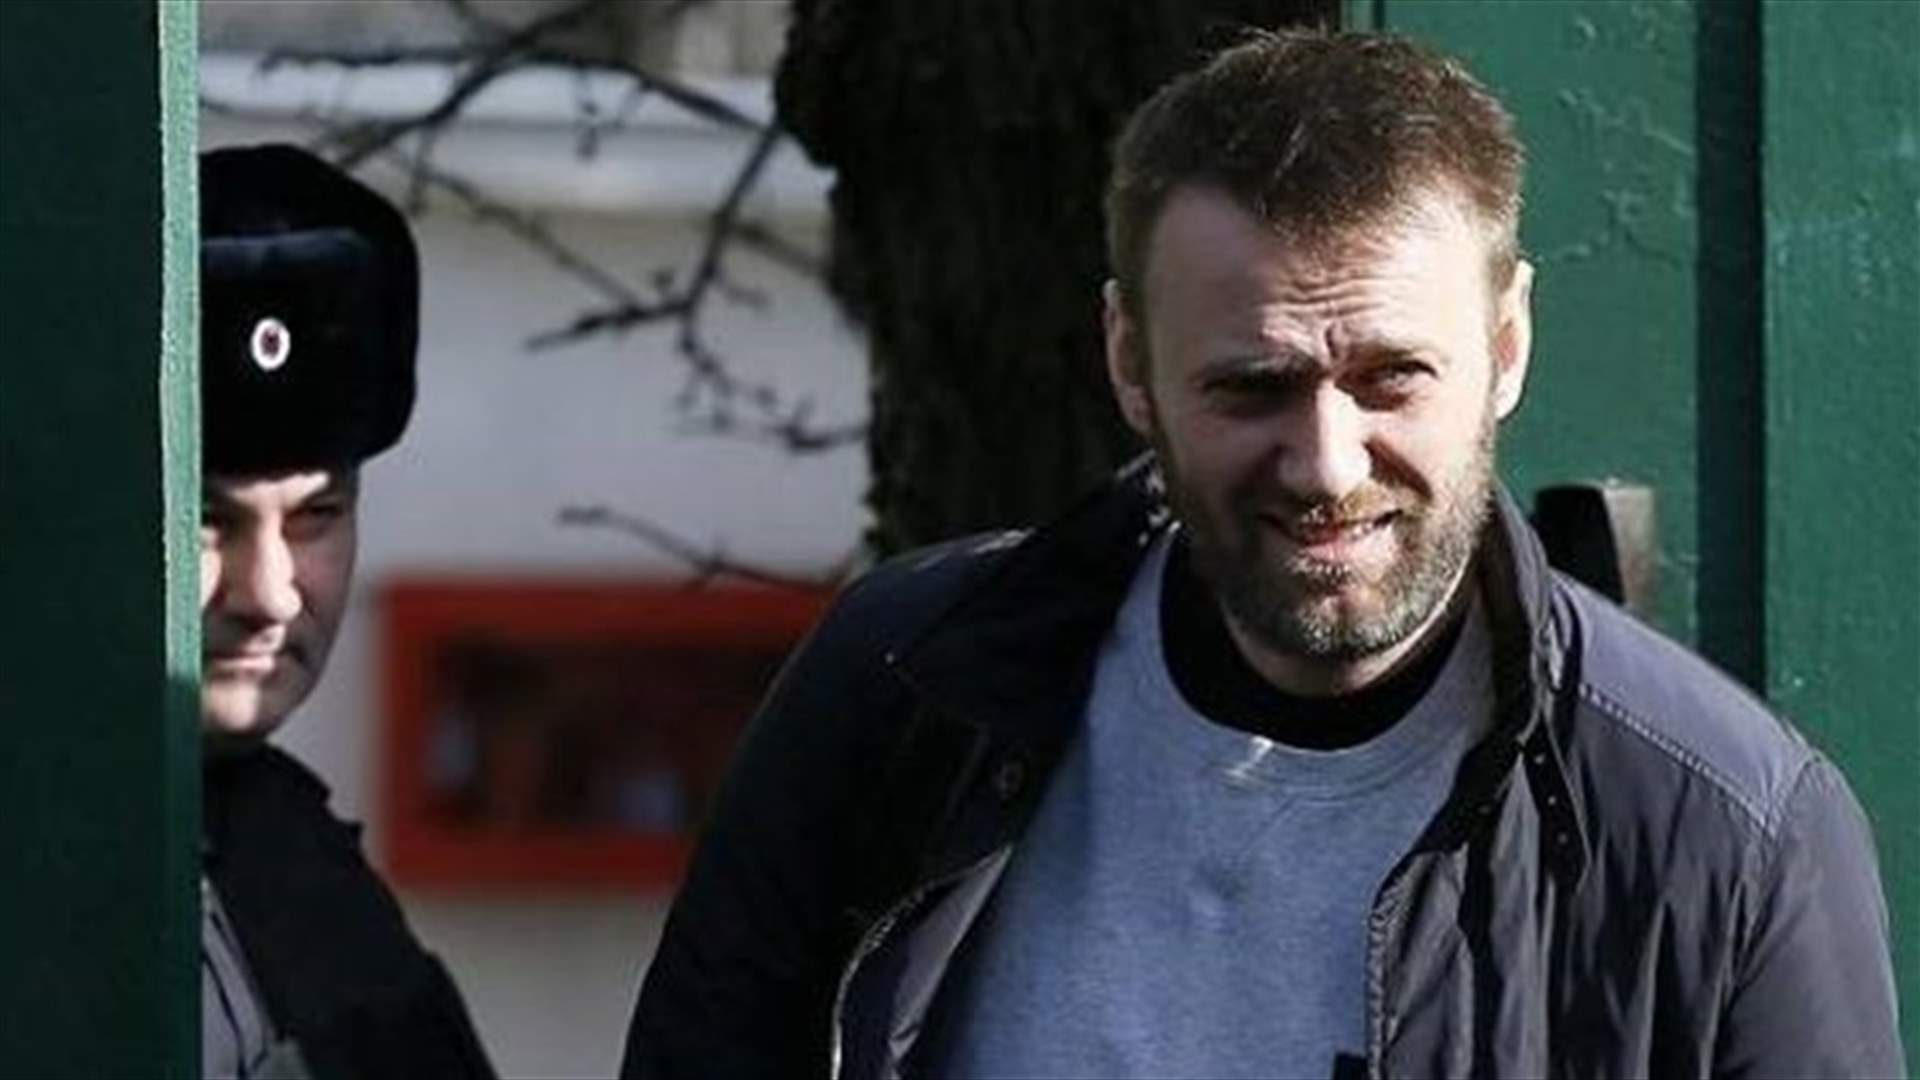 Putin critic Navalny released after 20-day detention